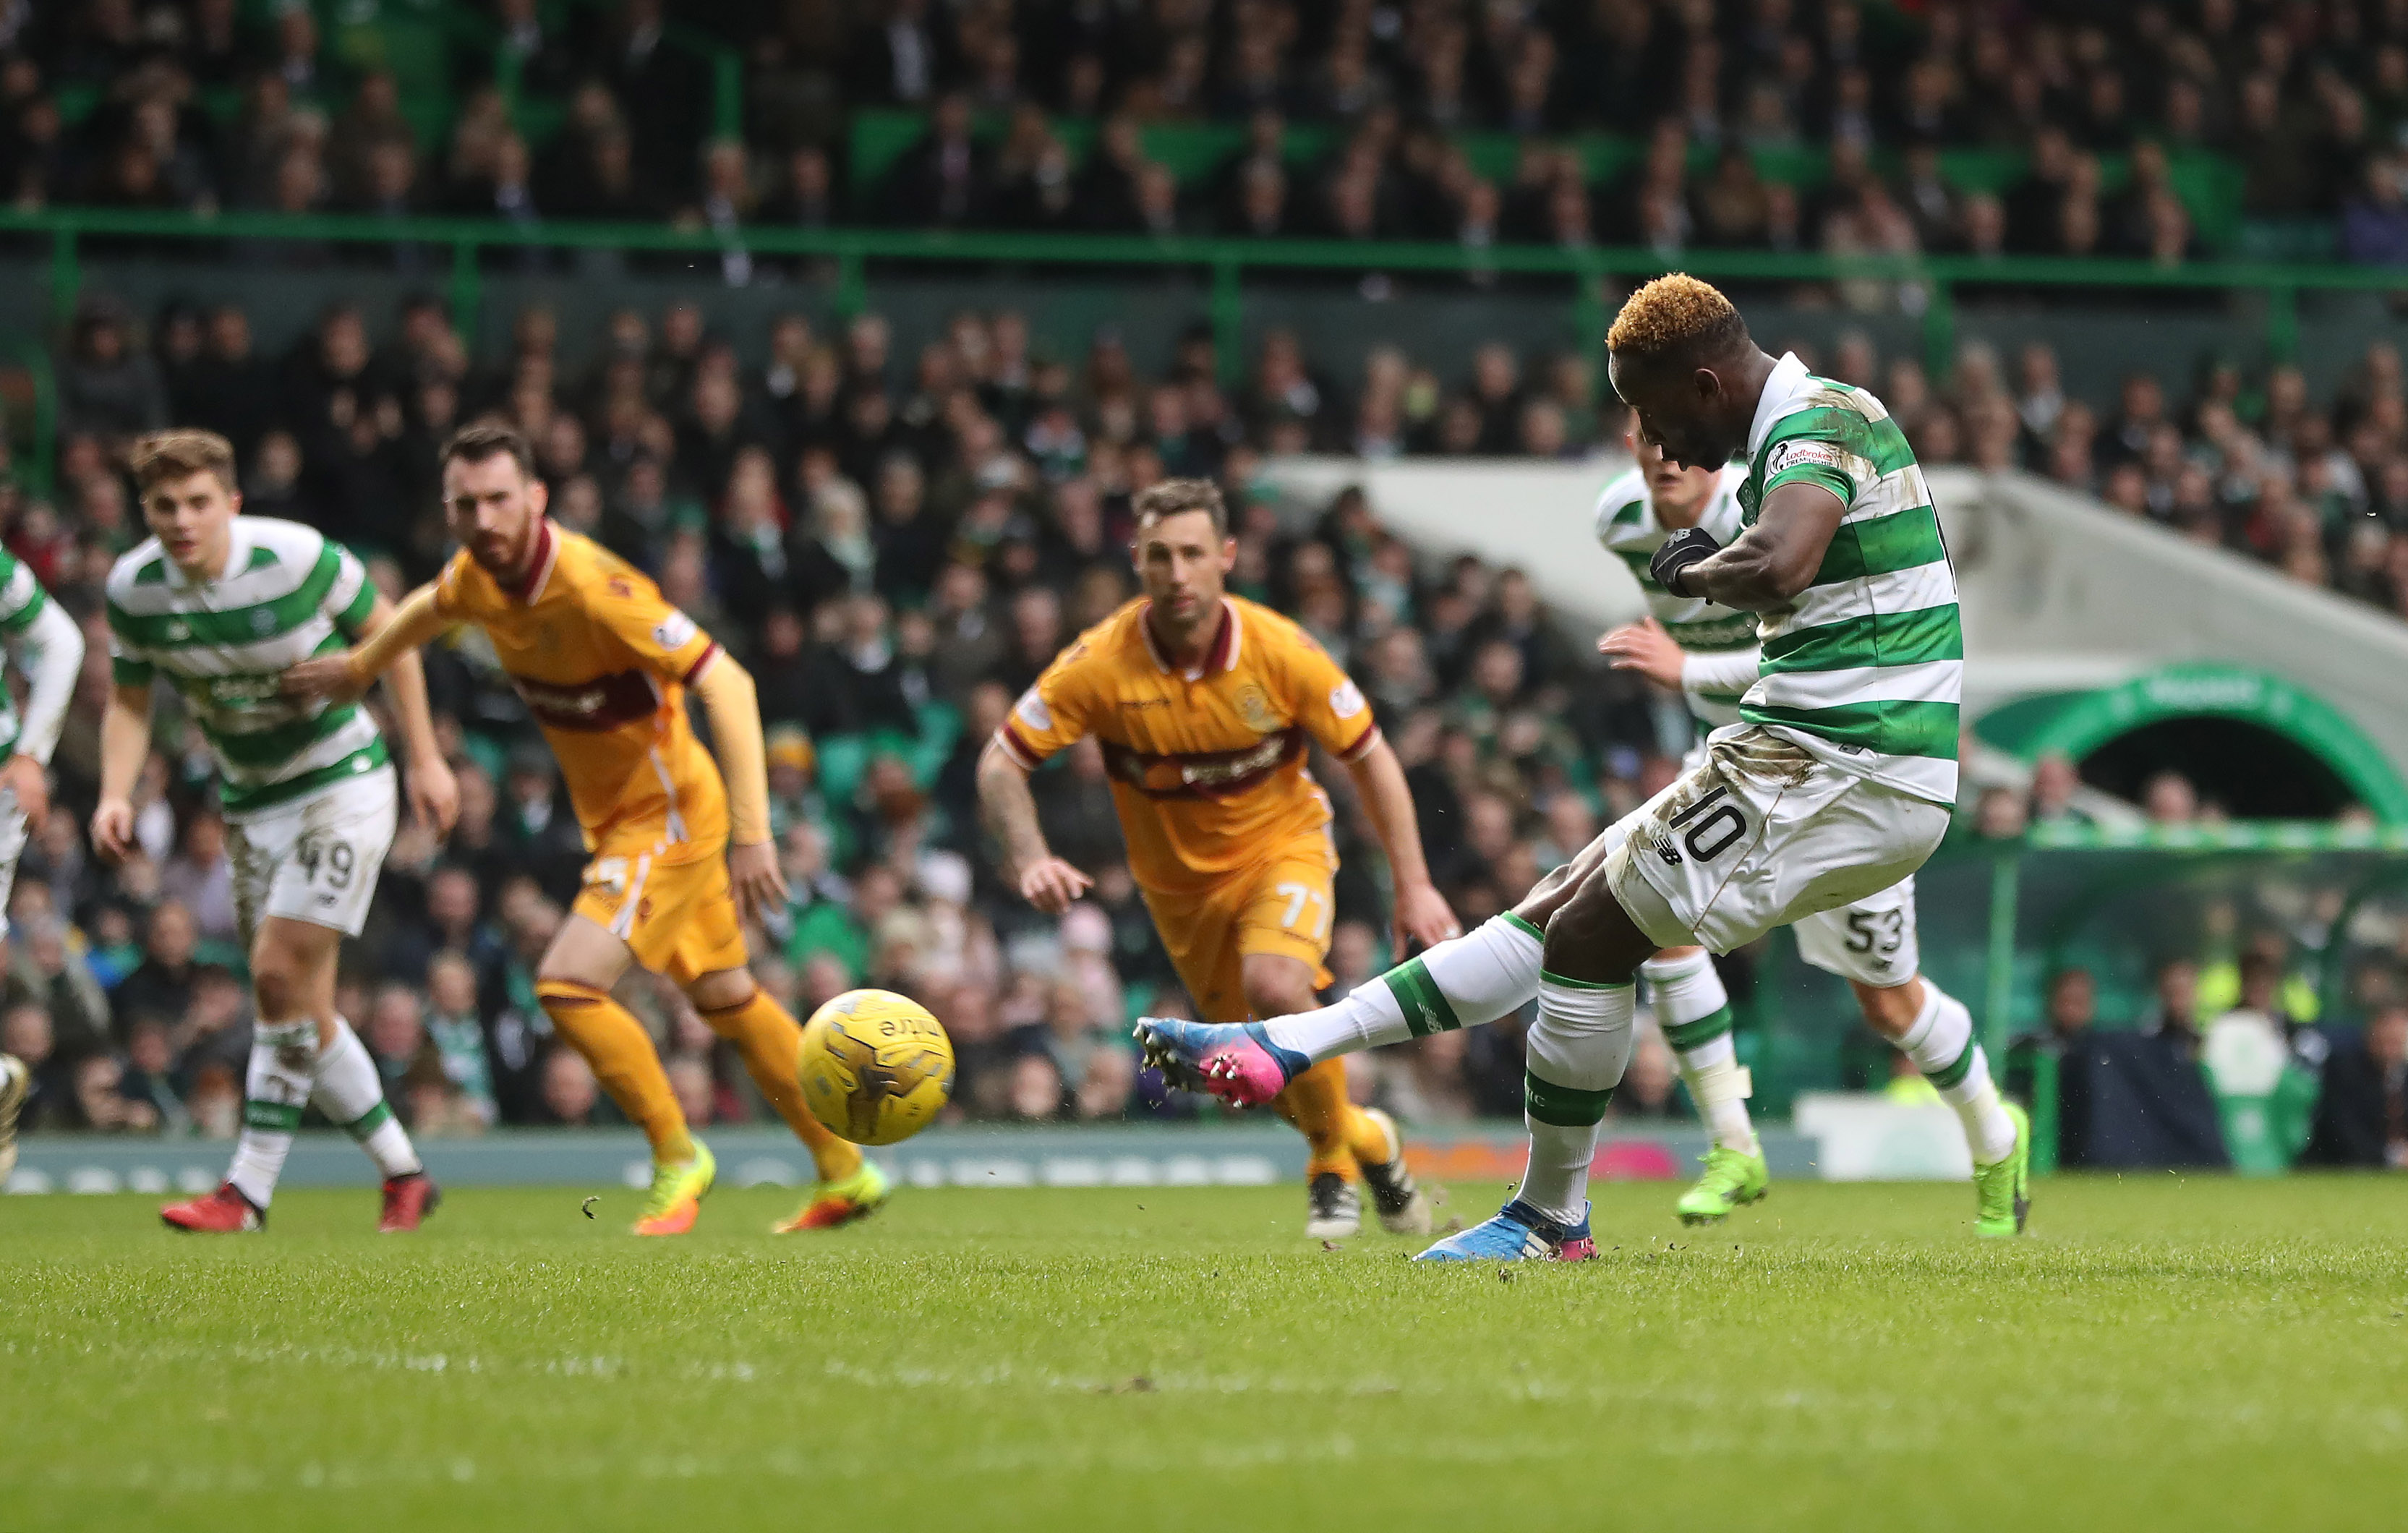 GLASGOW, SCOTLAND - FEBRUARY 18: Moussa Dembele of Celtic  scores the opening goal from the penalty spot during the Ladbrokes Scottish Premiership match between Celtic and  Motherwell at Celtic Park on February 18, 2017 in Glasgow, Scotland. (Photo by Ian MacNicol/Getty Images)